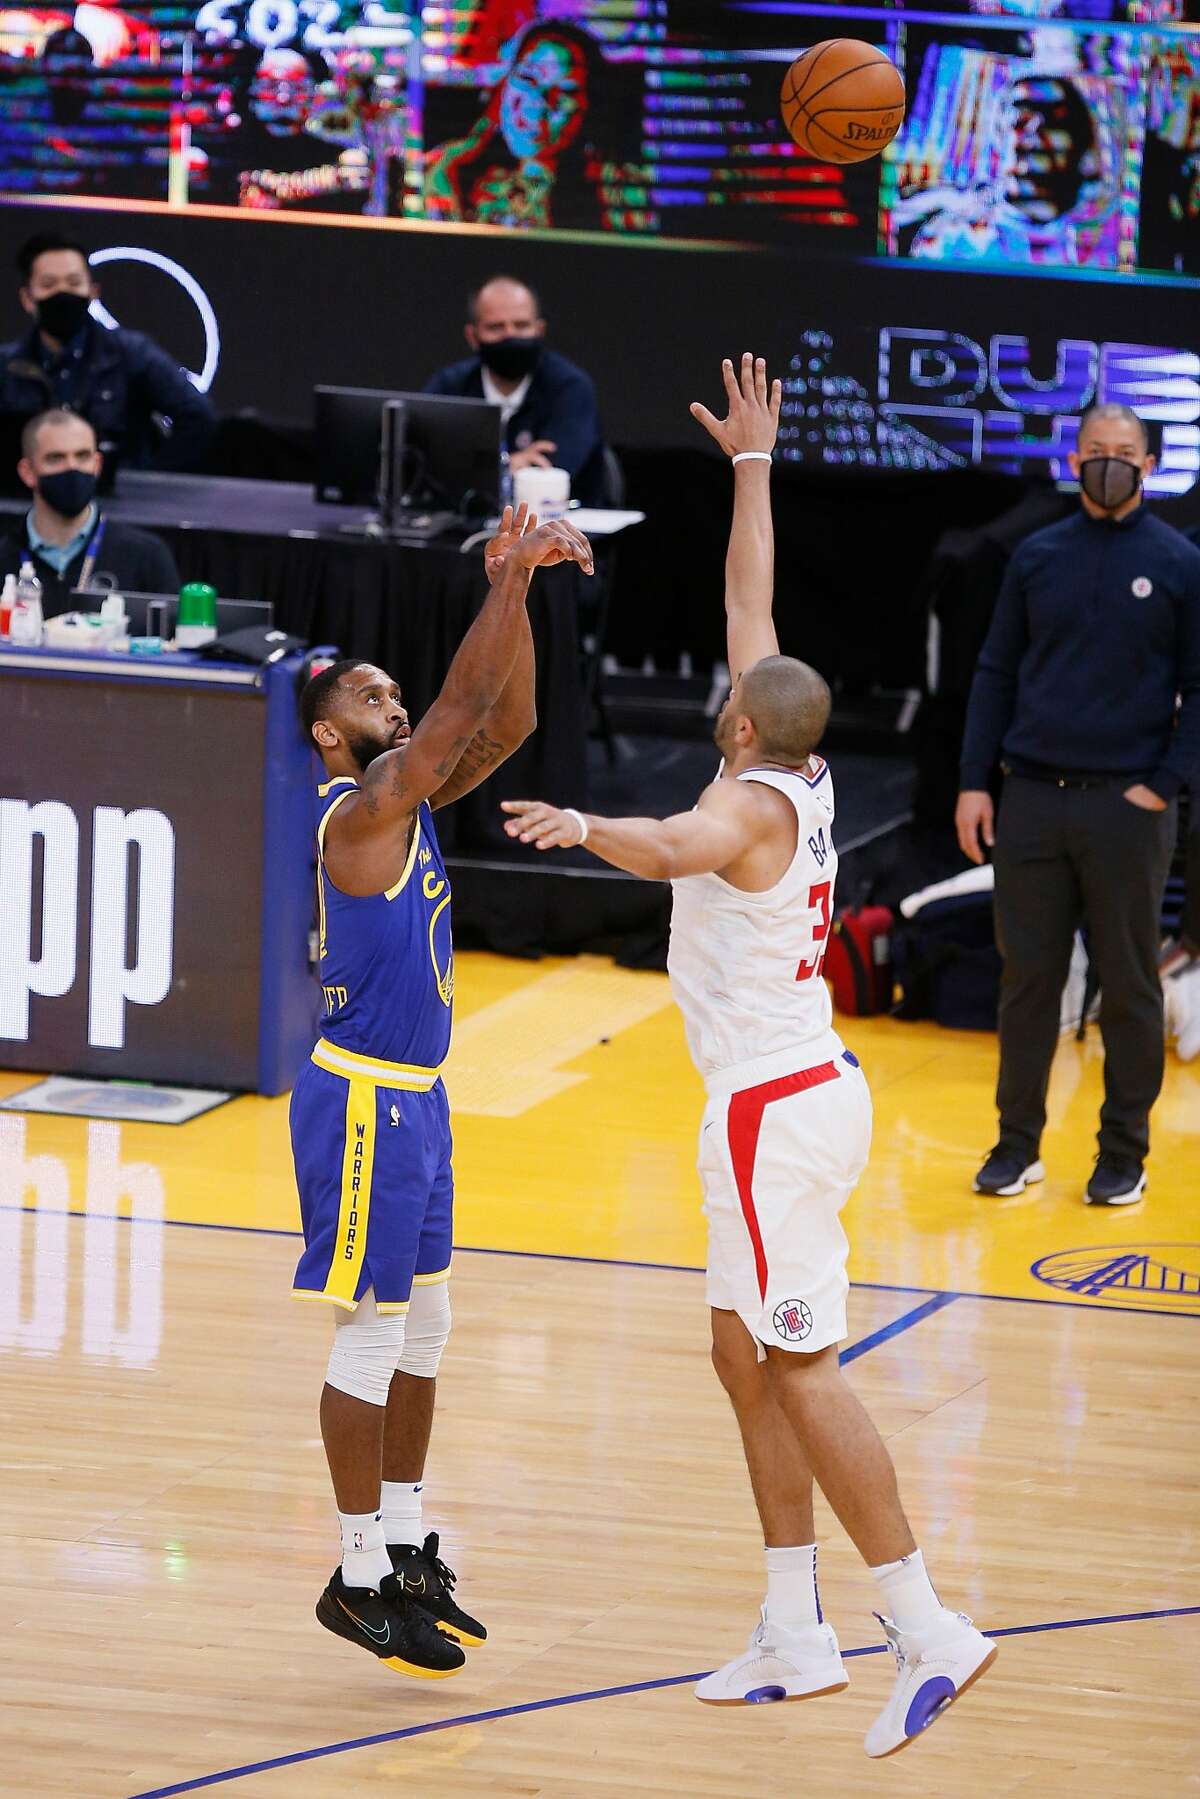 Golden State Warriors guard Brad Wanamaker (10) scores a three-point field goal against LA Clippers forward Nicolas Batum (33) in the fourth quarter during an NBA game at Chase Center, Friday, Jan. 8, 2021, in San Francisco, Calif. The Warriors won 115-105.